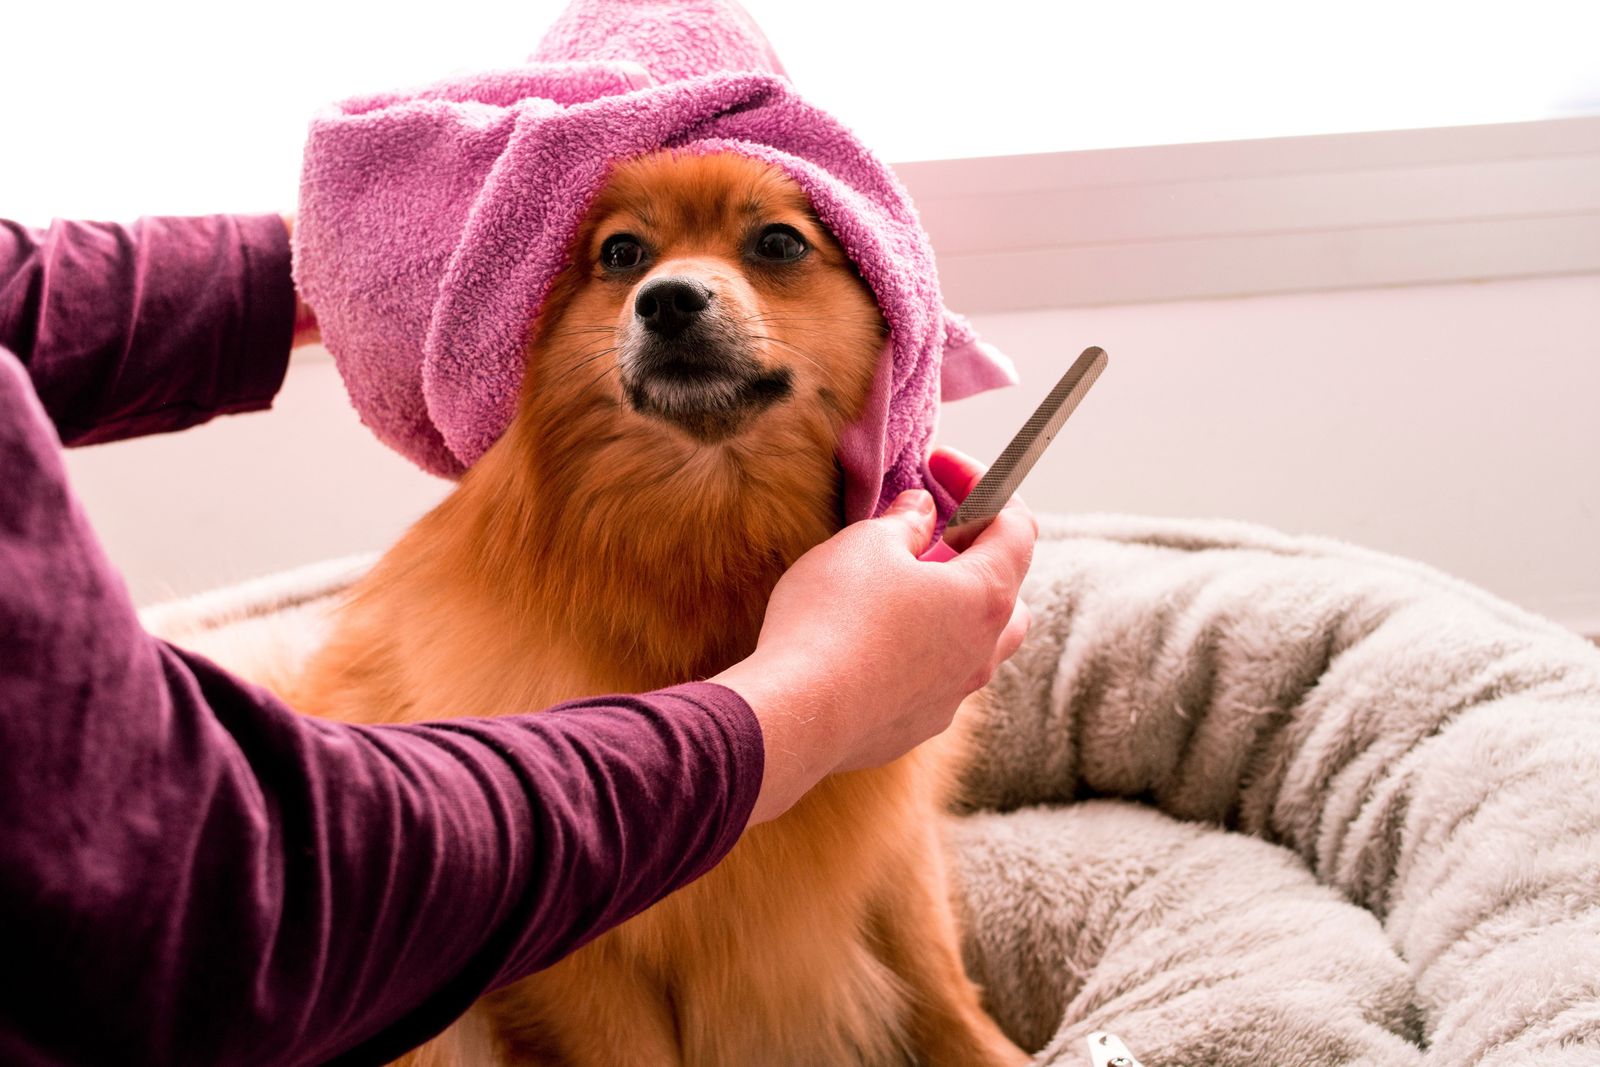 What kind of grooming does your dog need? - Pomeranian in pink towel being brushed